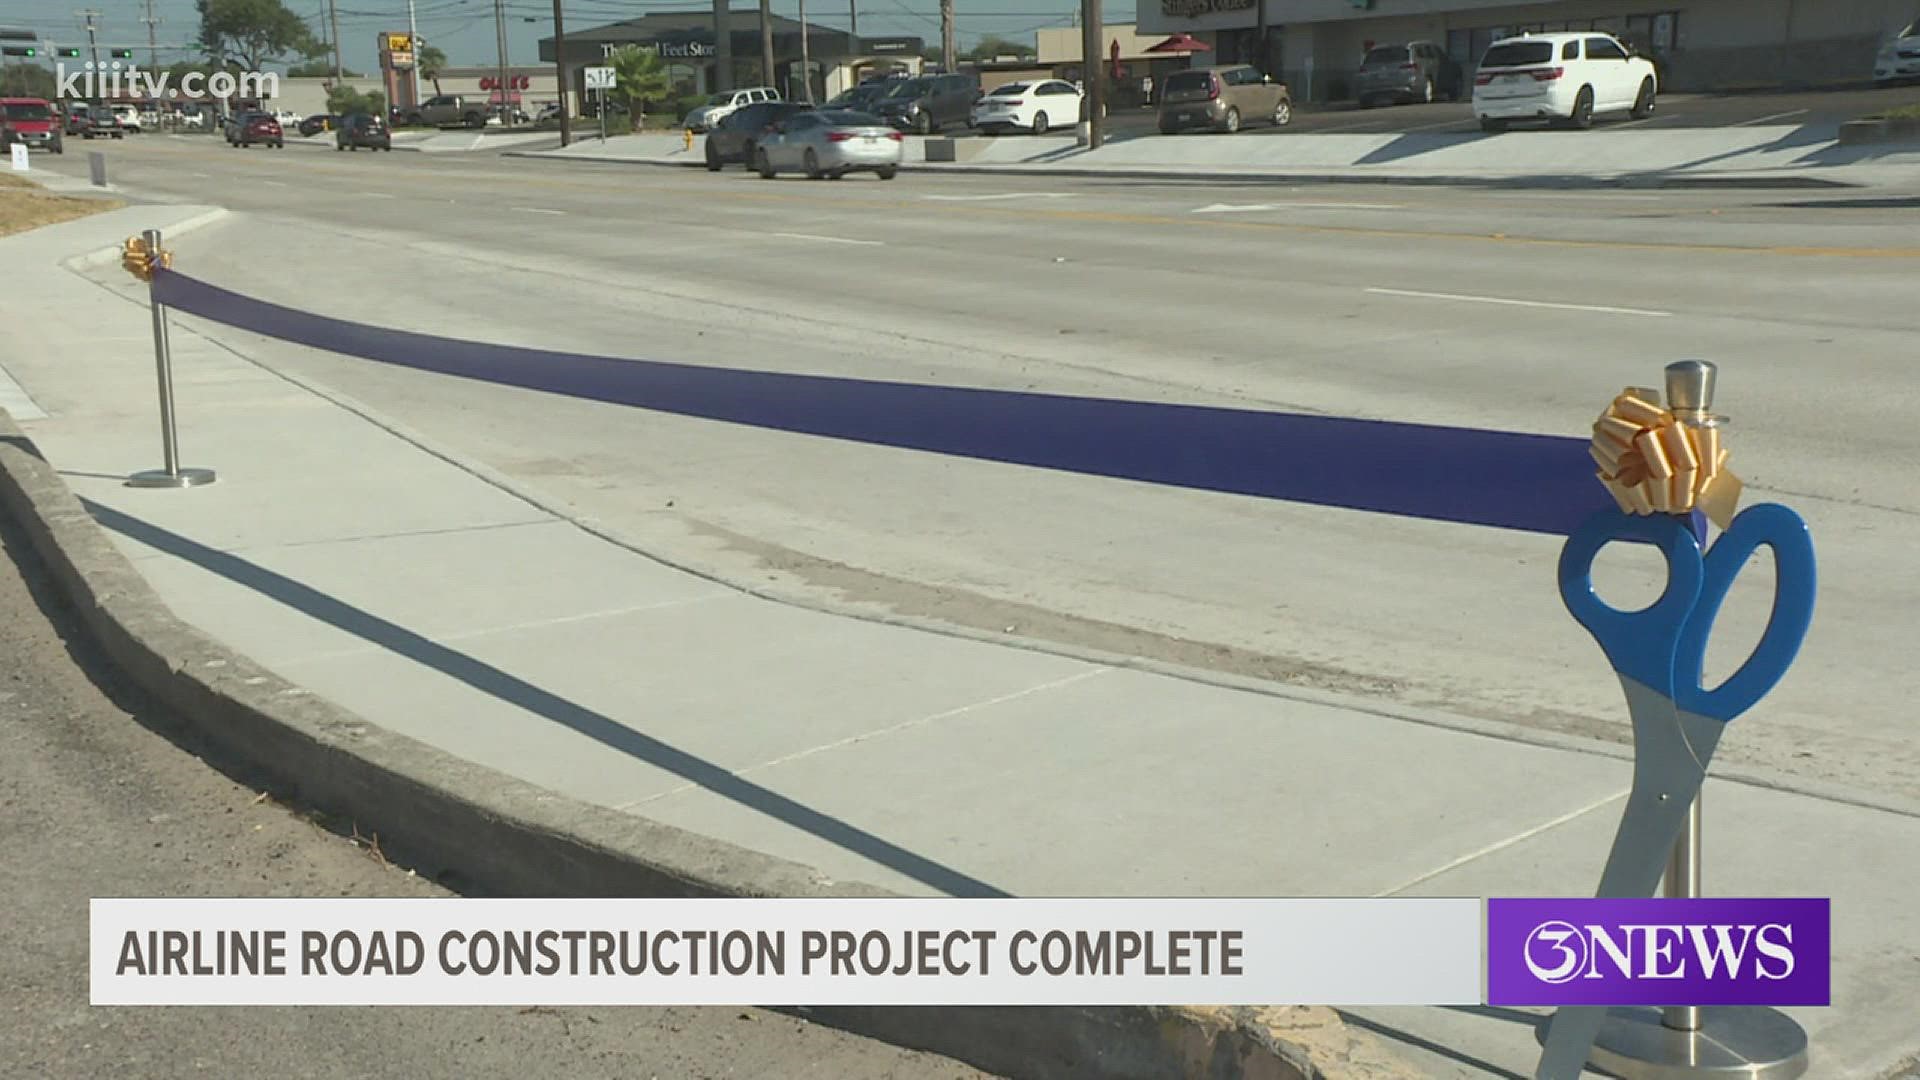 Corpus Christi Mayor Paulette Guajardo and other City leaders spoke about the importance of the construction and what that means for residents.